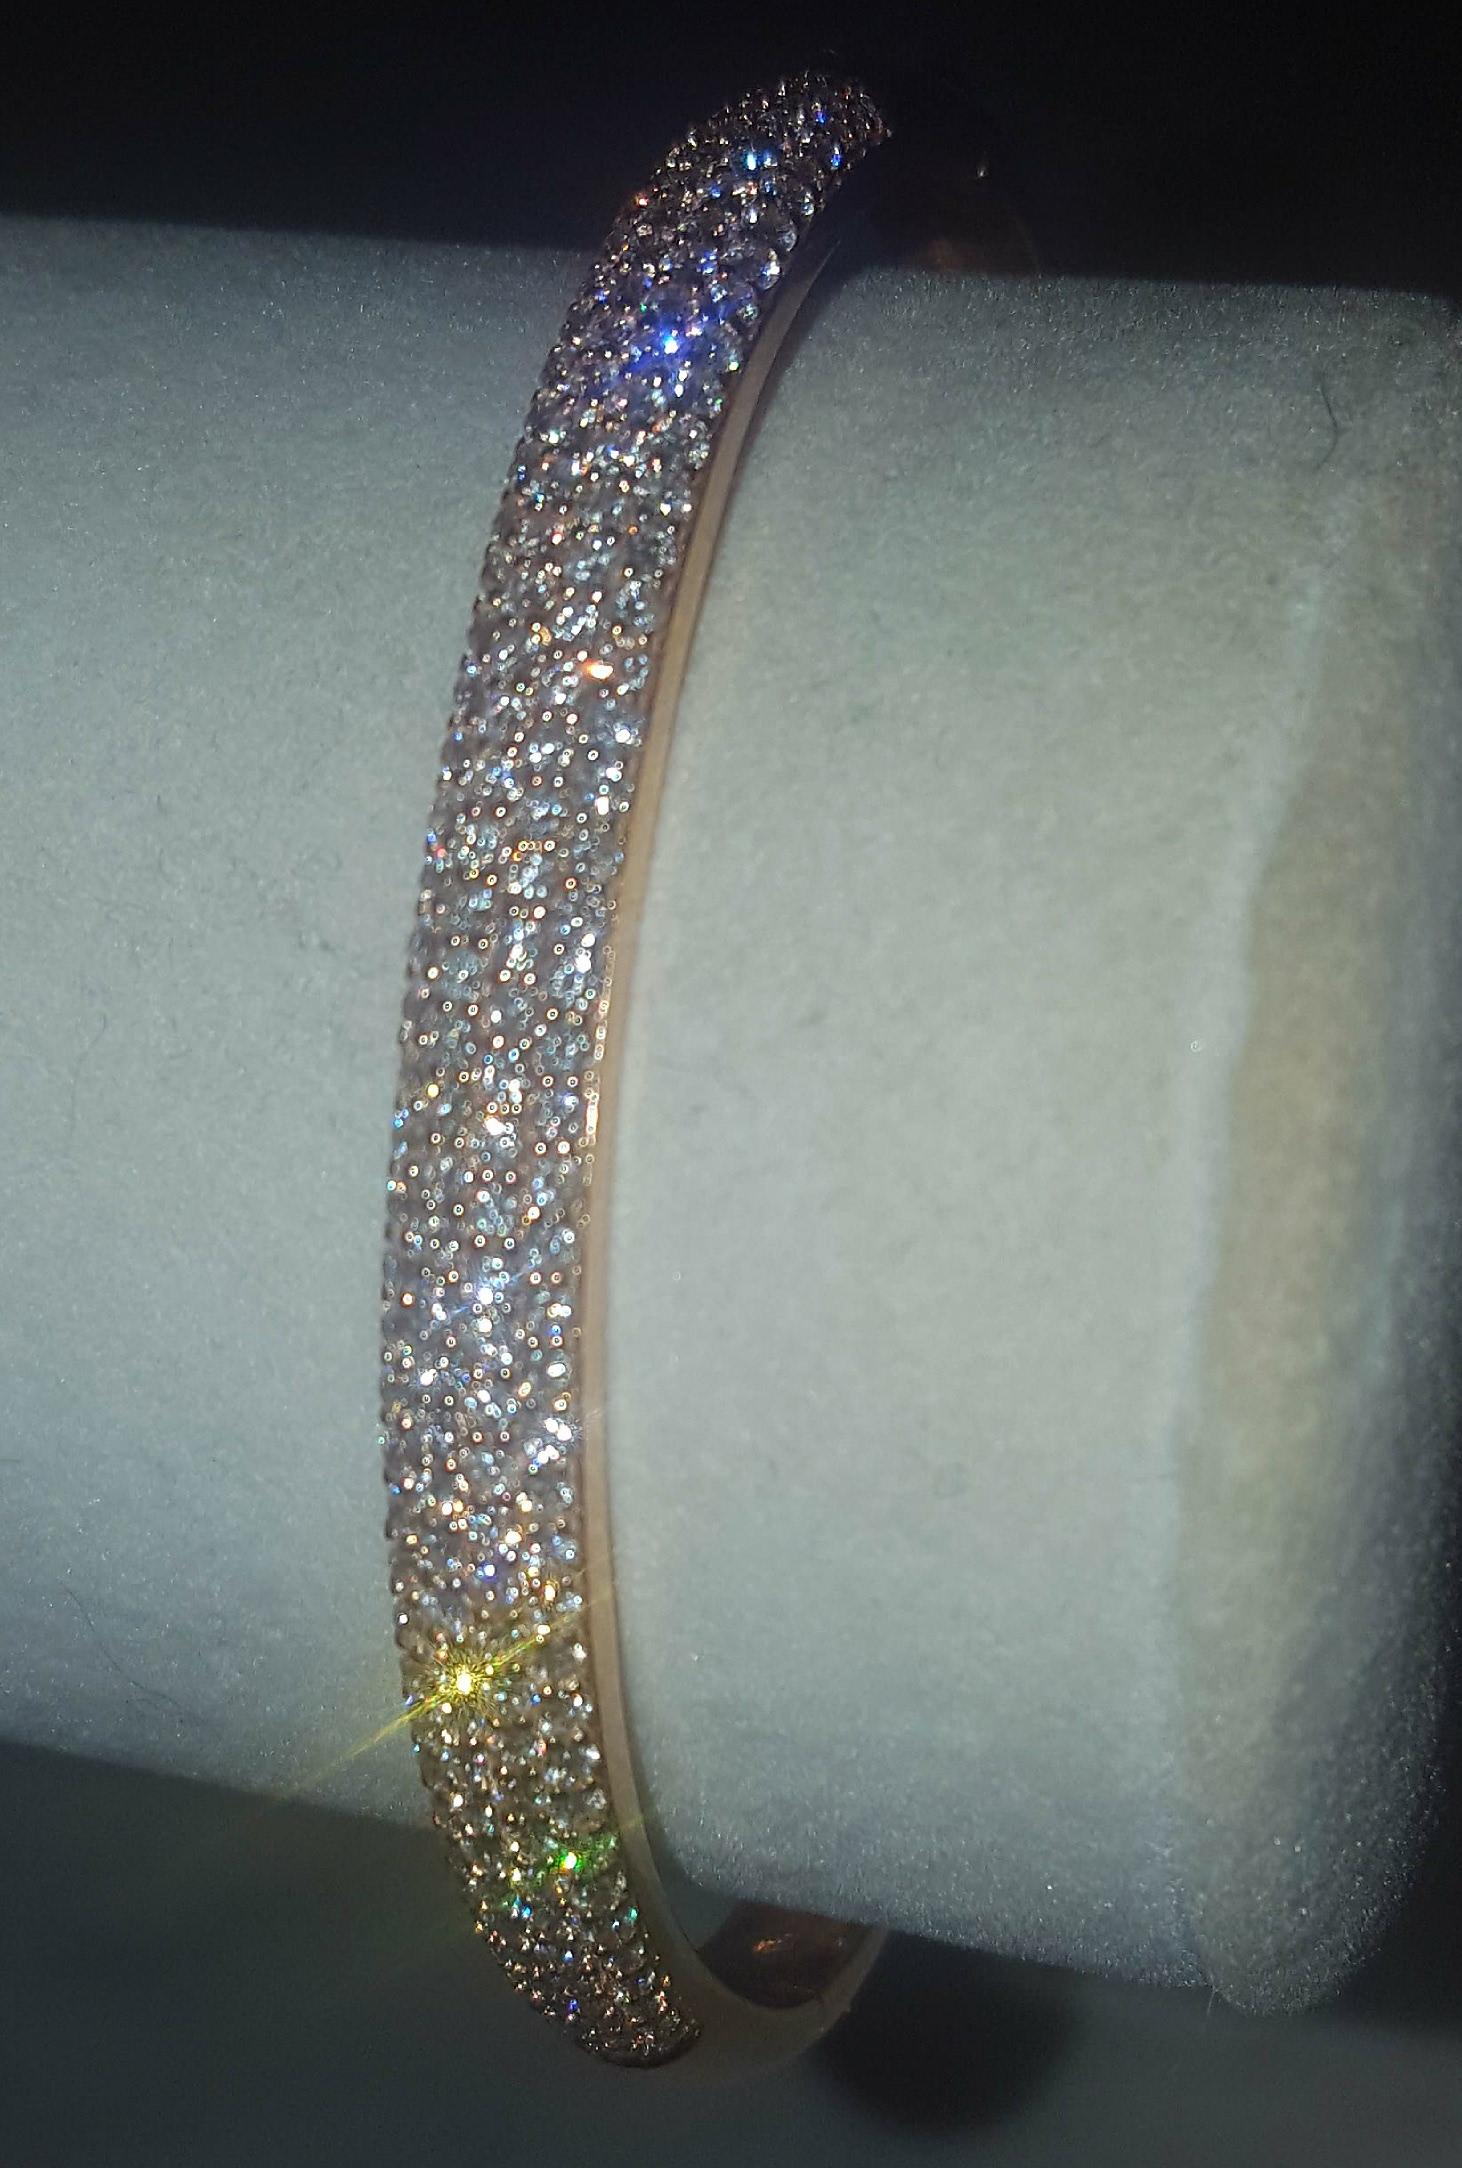 Brand new, never worn!  Crafted in 18 karat rose gold, this tapered bangle boasts a top section containing 172 round white diamonds, pave set, with a combined total weight of 2.32 carats.  The sparkle is eye popping!  A double 'click' hidden clasp